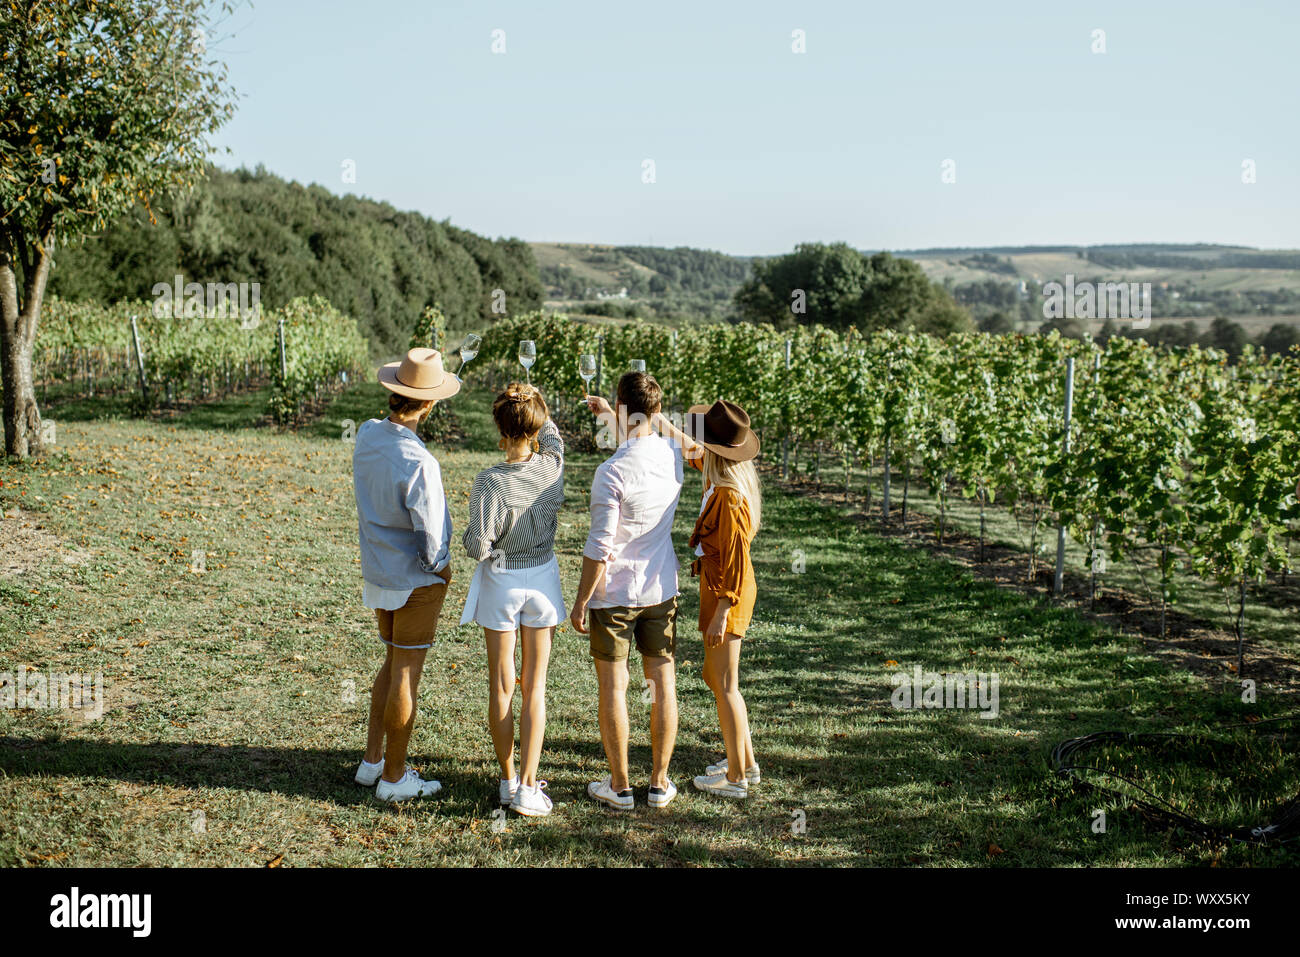 Group of young friends tasting wine on the vineyard, enjoying beautiful landscape view on a sunny summer morning, view from the backside Stock Photo